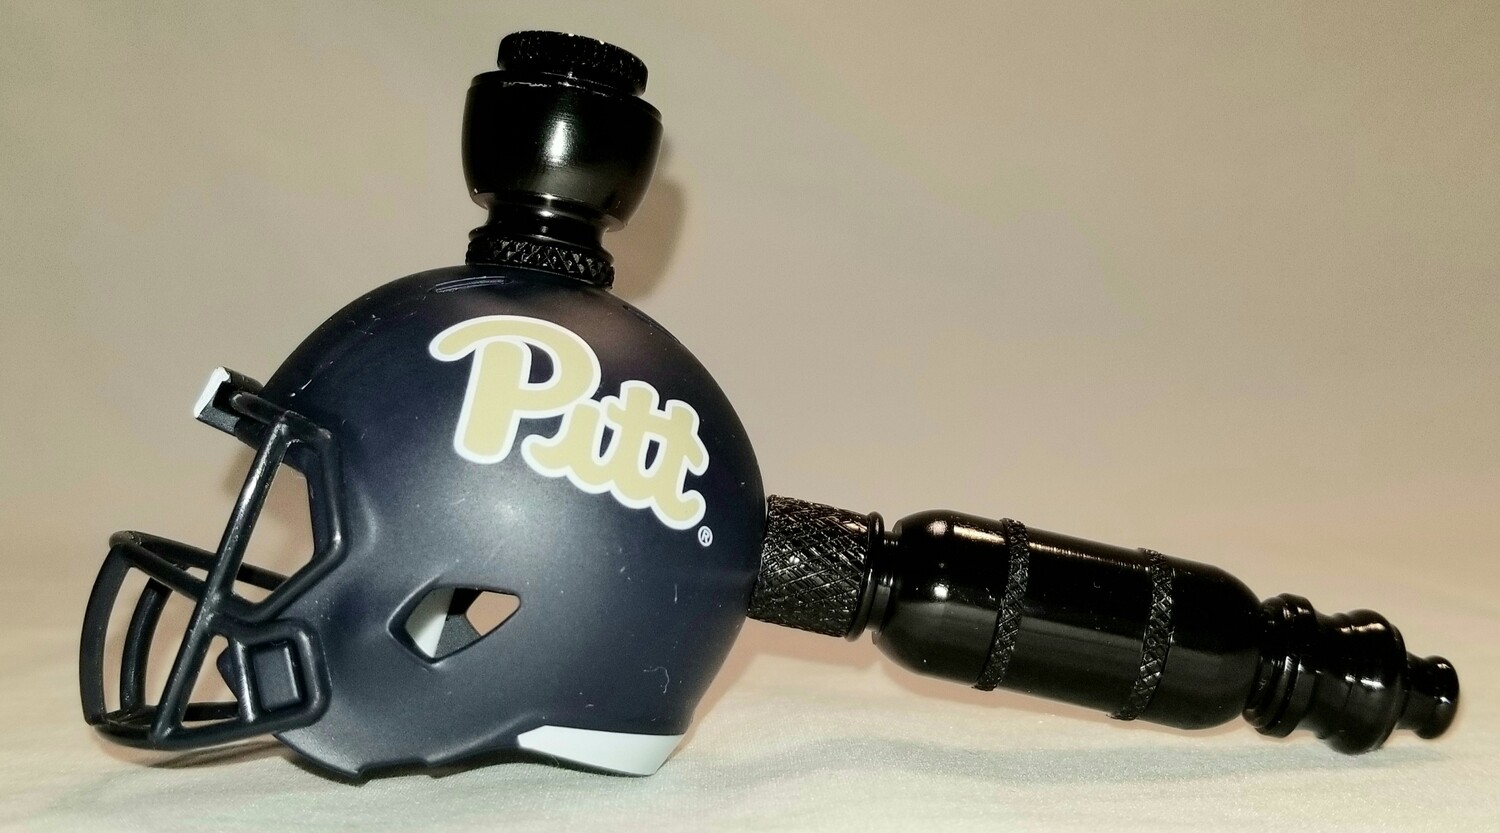 PIT PANTHERS "BAD ASS" FOOTBALL HELMET SMOKING PIPE Straight/Black Anodized/Navy